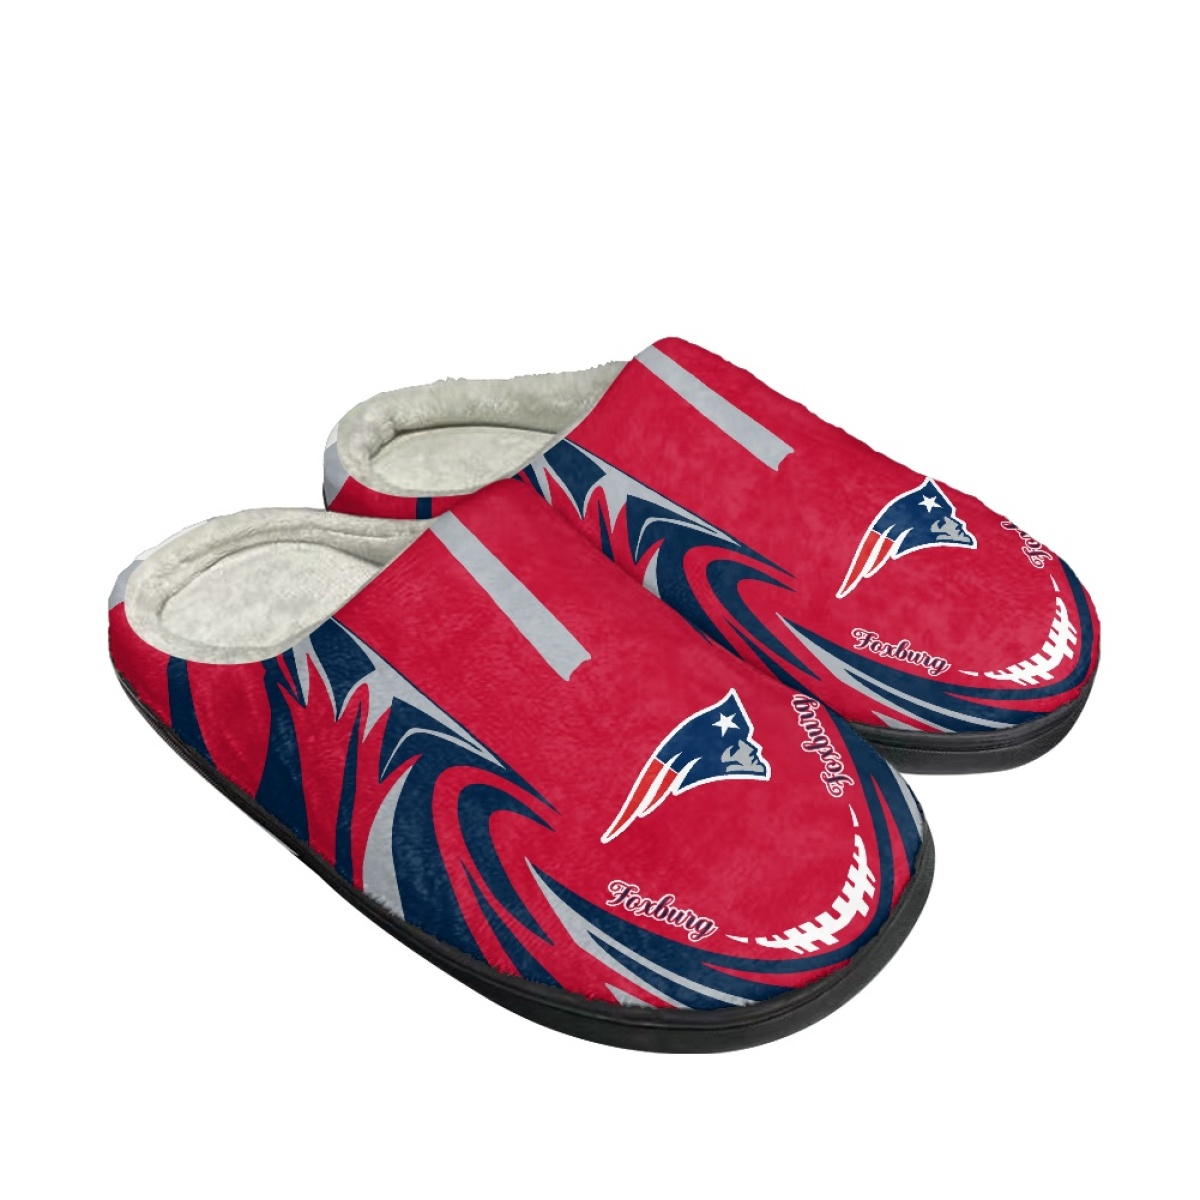 Men's New England Patriots Slippers/Shoes 004